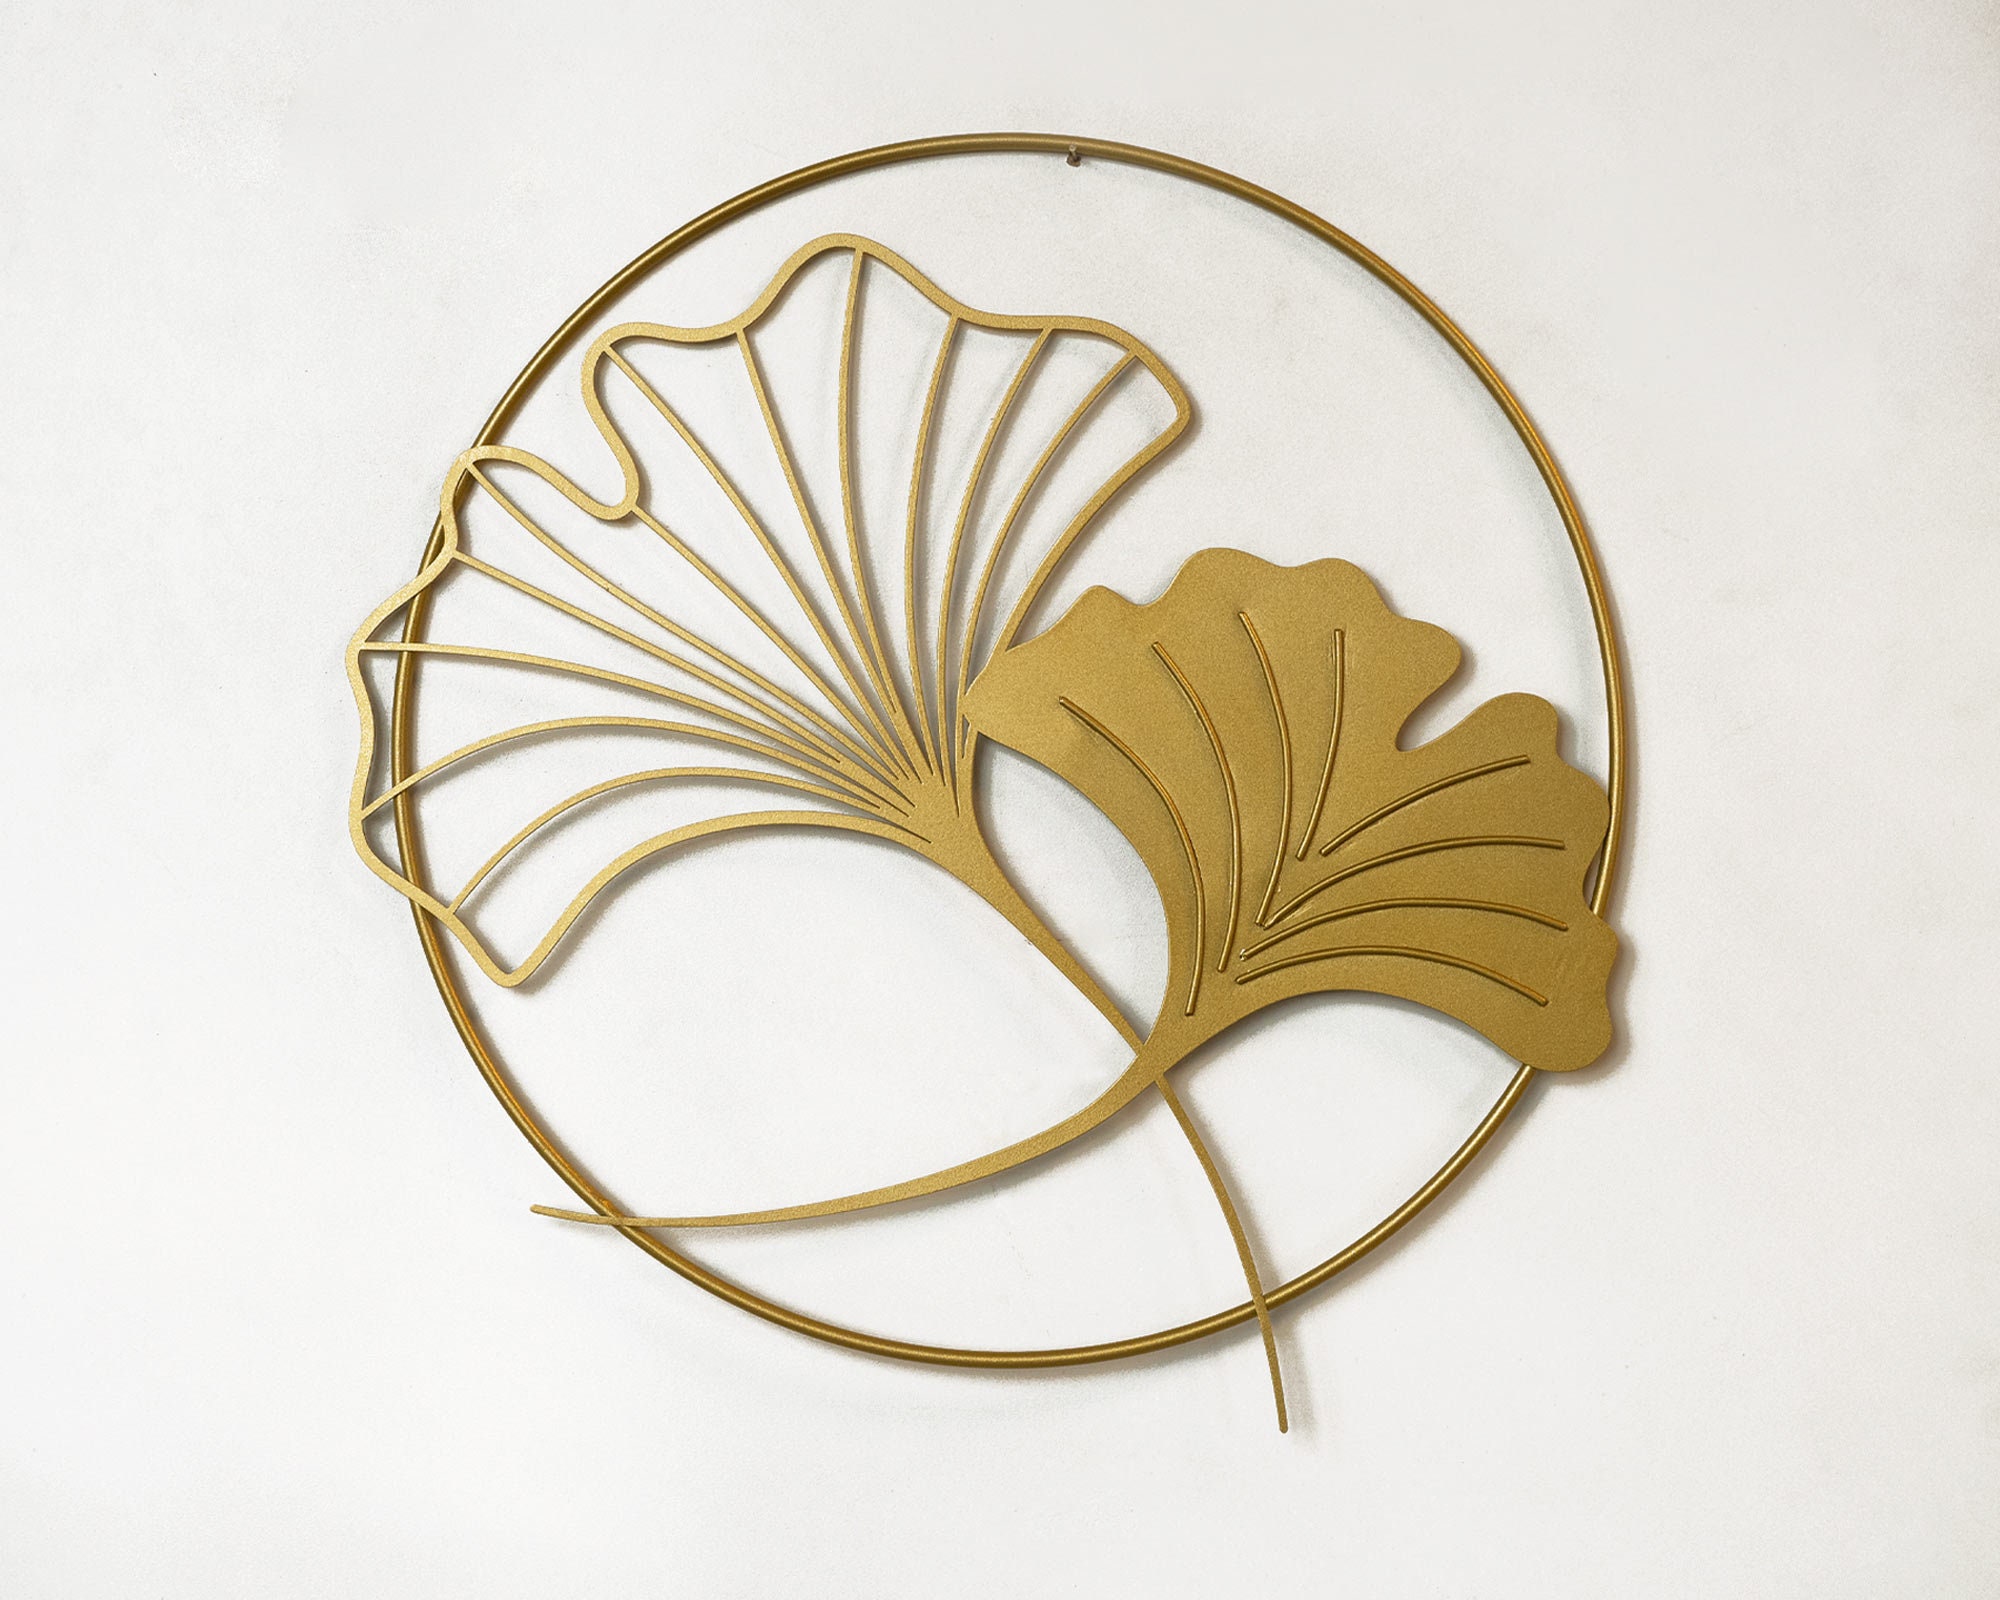 Brass Leaf Wall Hanging (Set of 8)